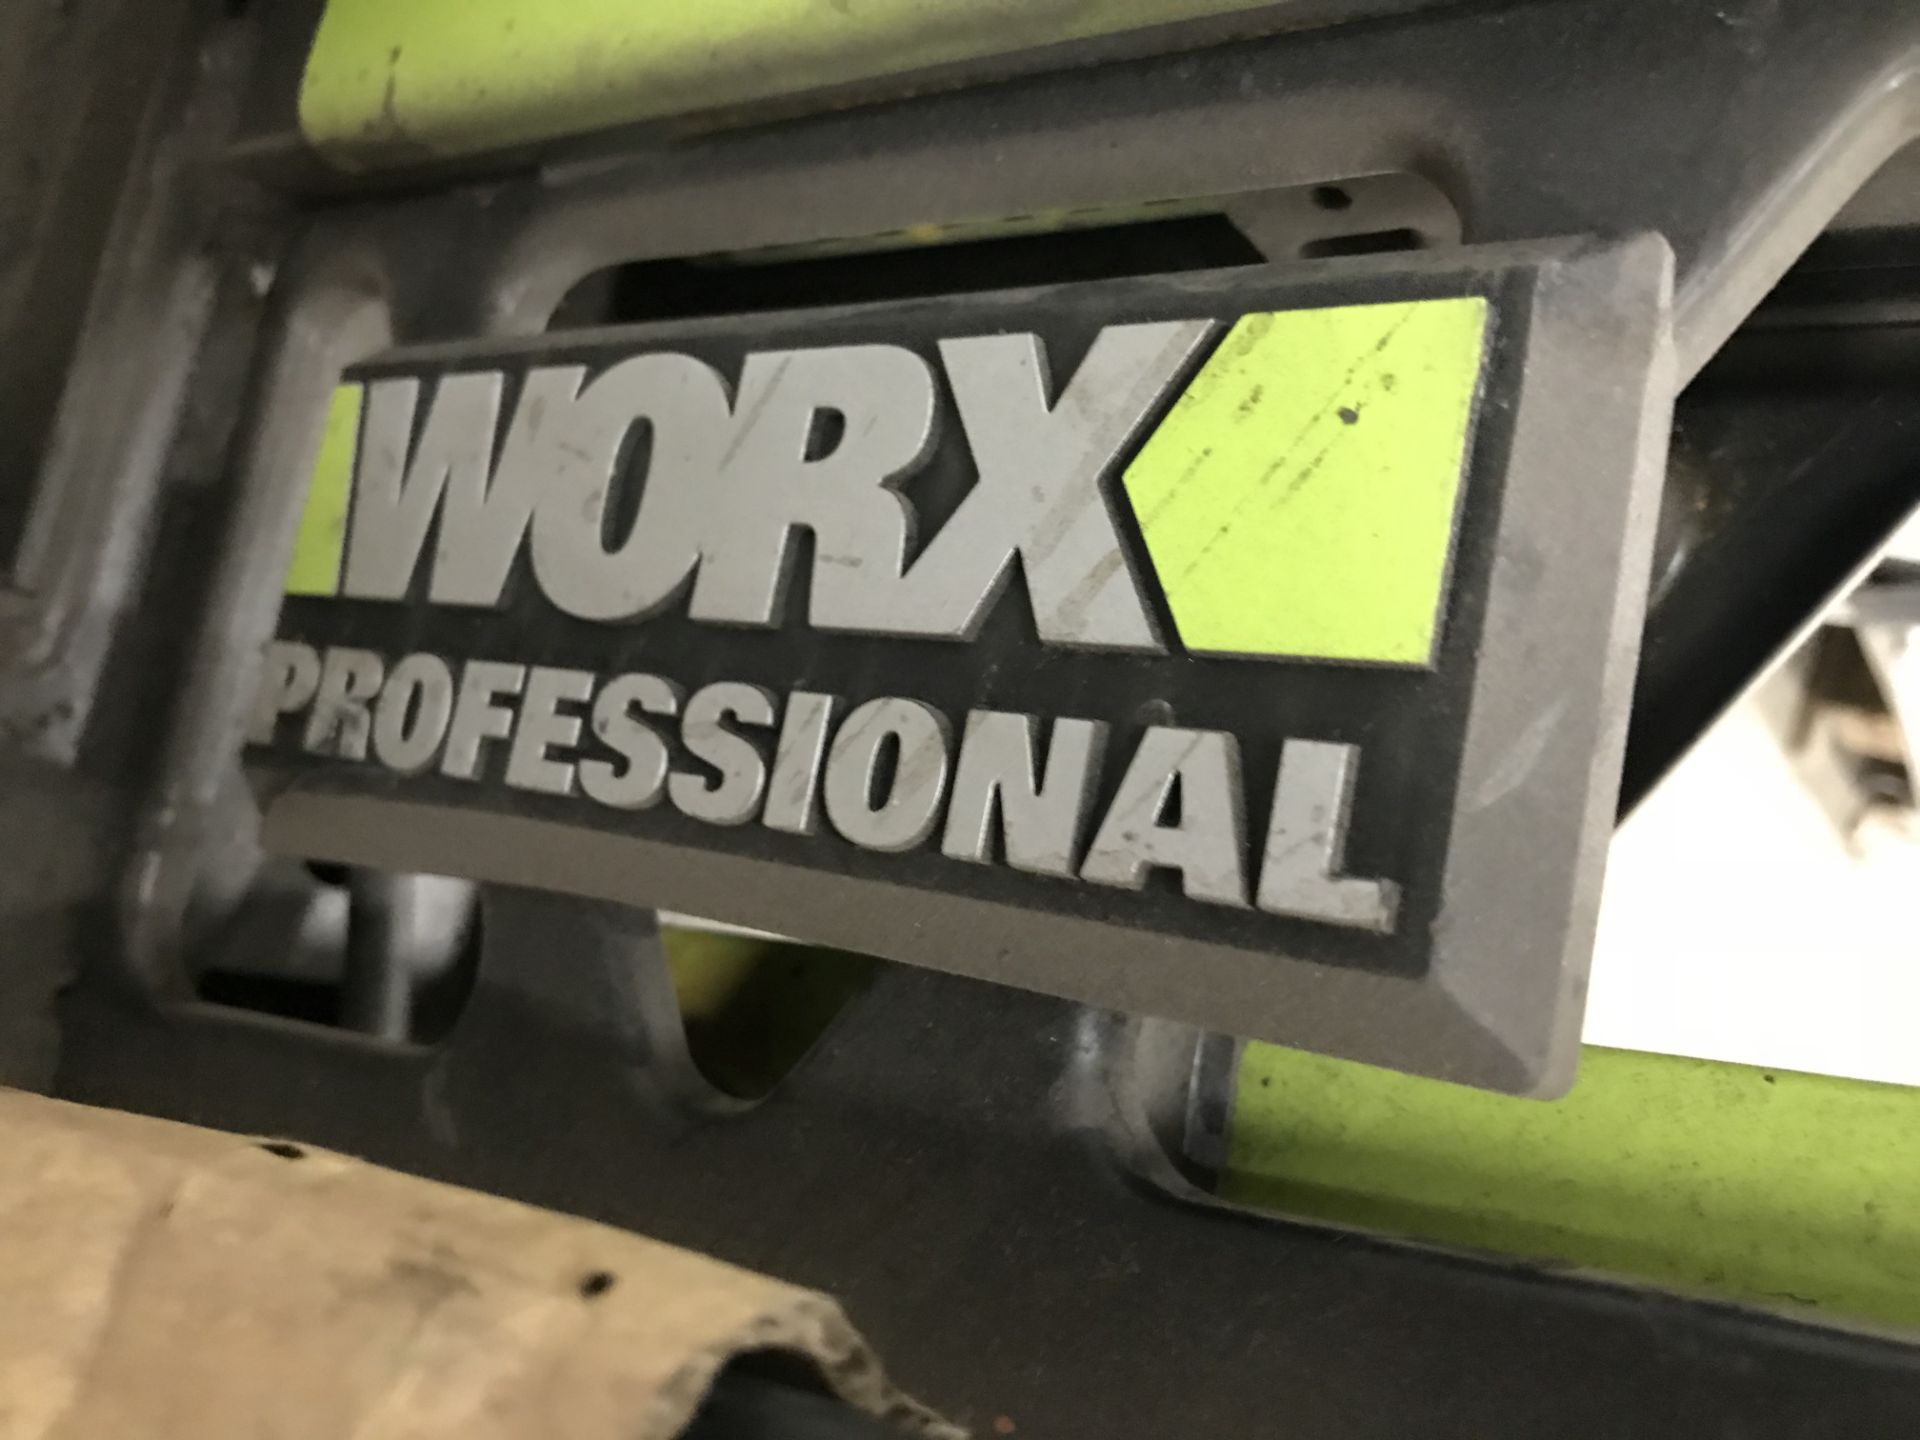 Worx Professional Jawhorse Portable Work Support Station - Image 3 of 4